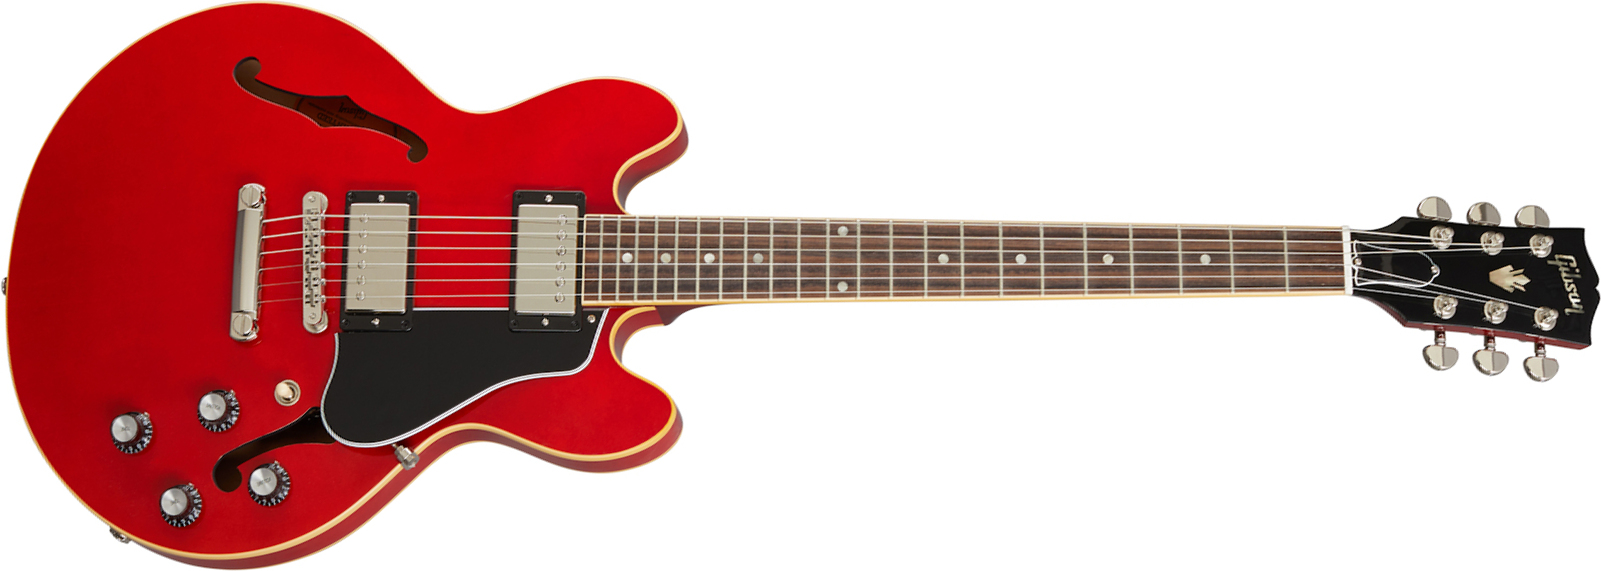 Gibson Es-339 Modern 2h Ht Rw - Cherry - Semi-hollow electric guitar - Main picture